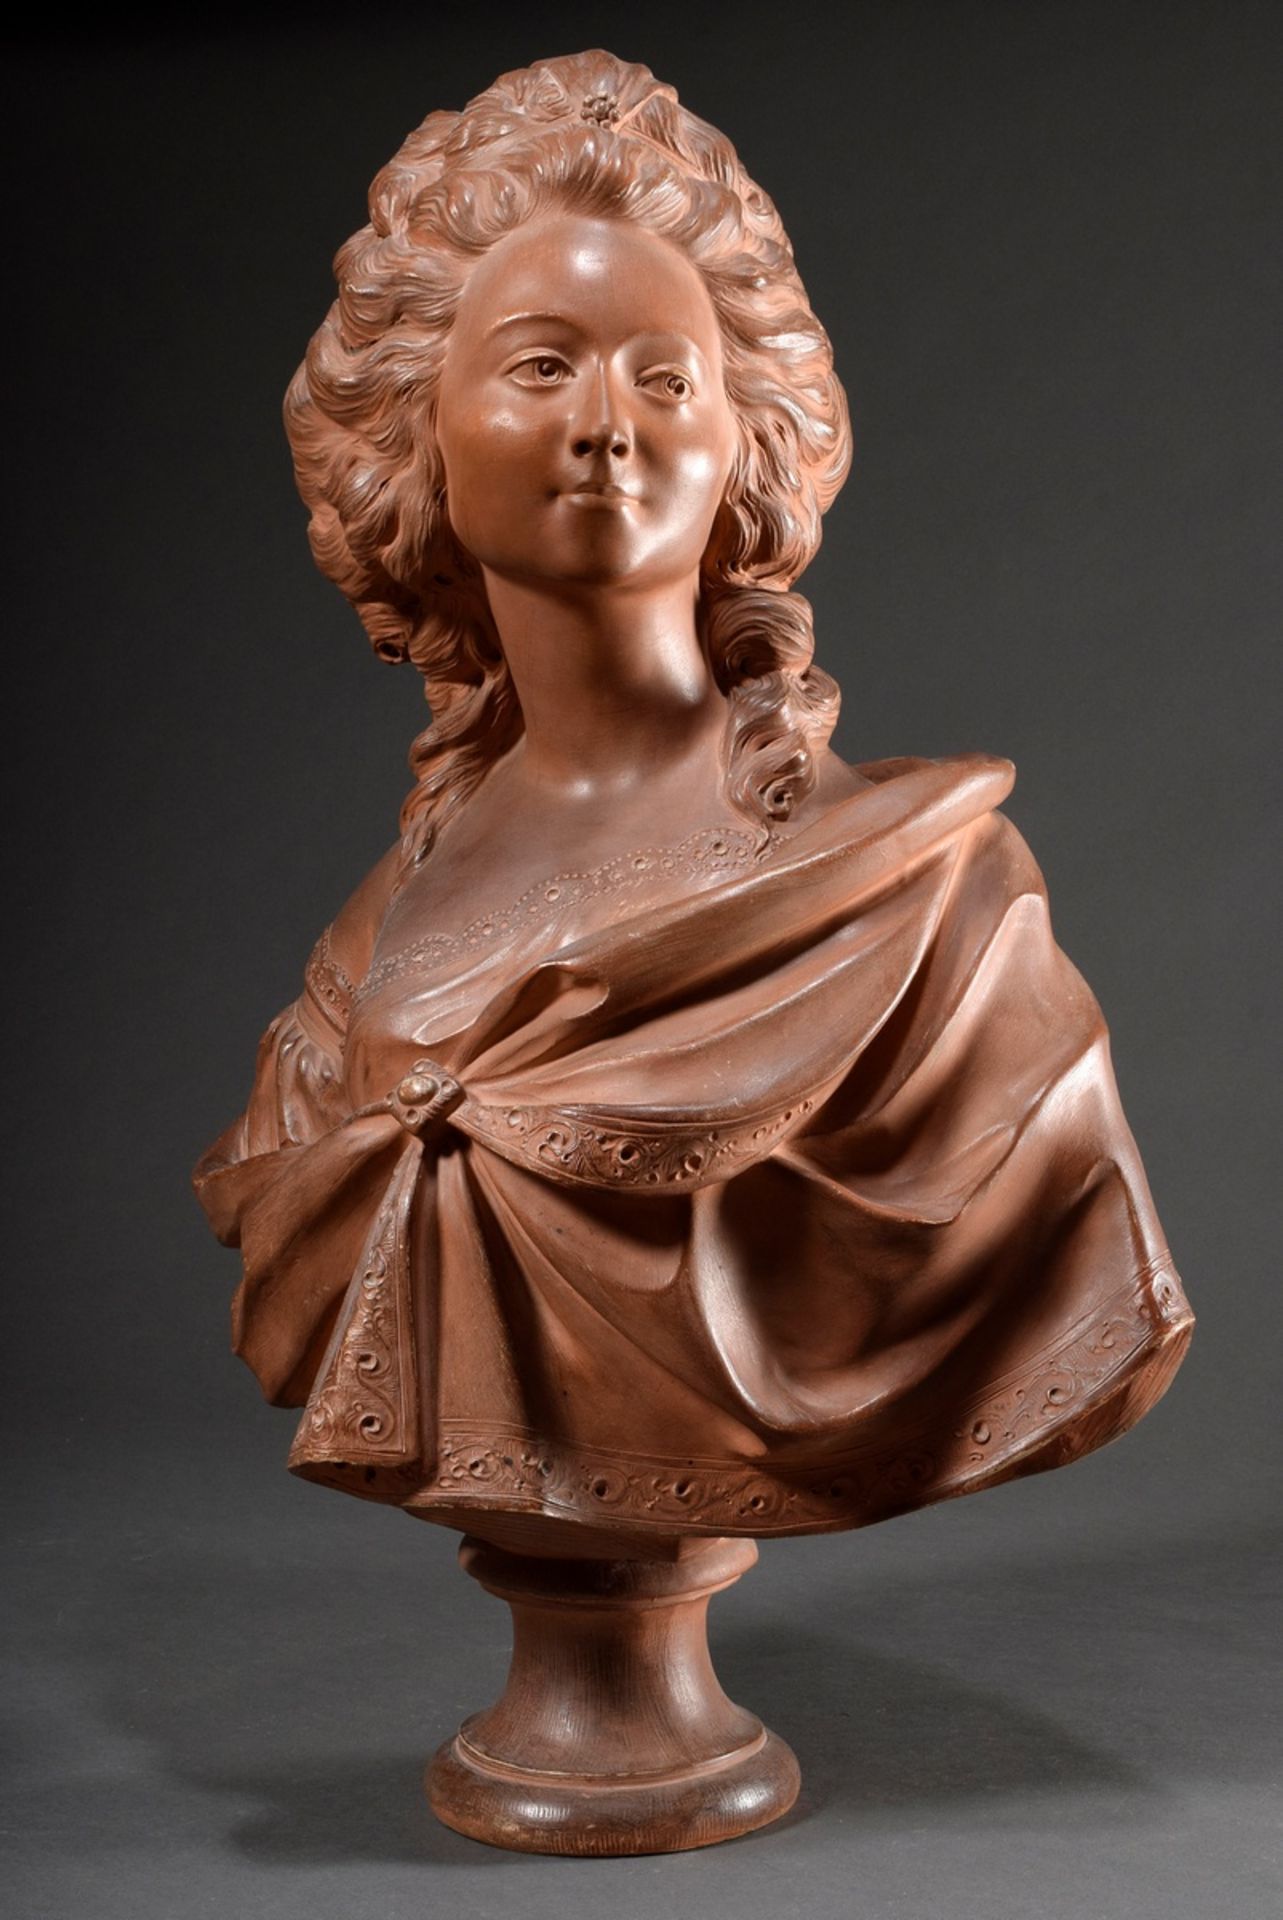 Life-size bust "Madame du Barry" (?) after Augustin Pajou (1730-1809), terracotta, inscribed on the